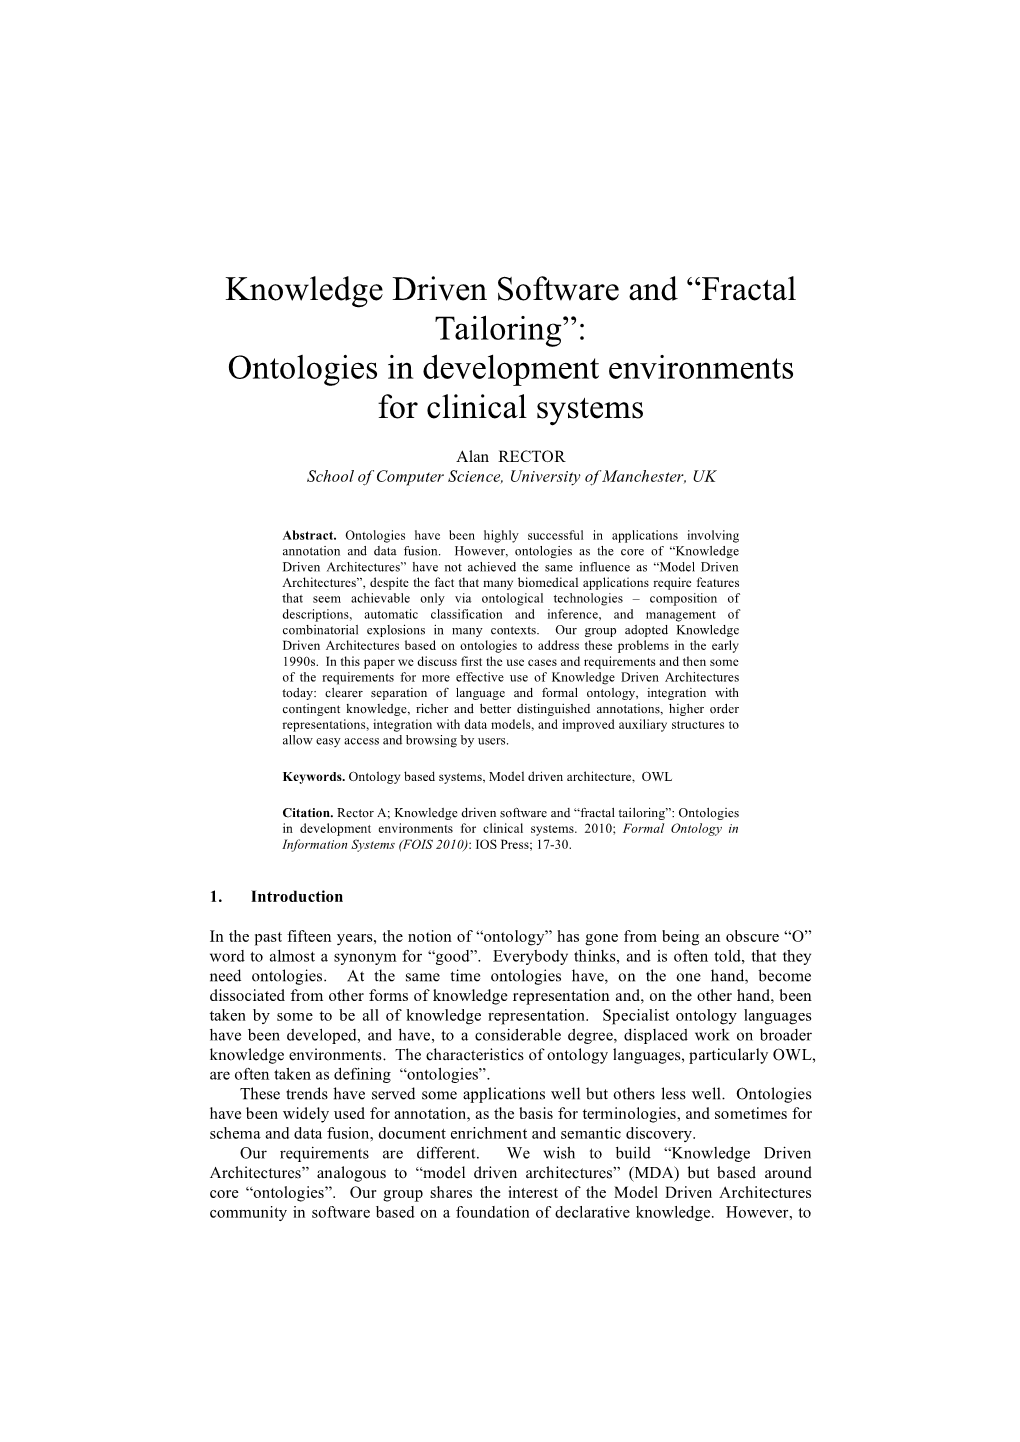 Knowledge Driven Software and “Fractal Tailoring”: Ontologies in Development Environments for Clinical Systems